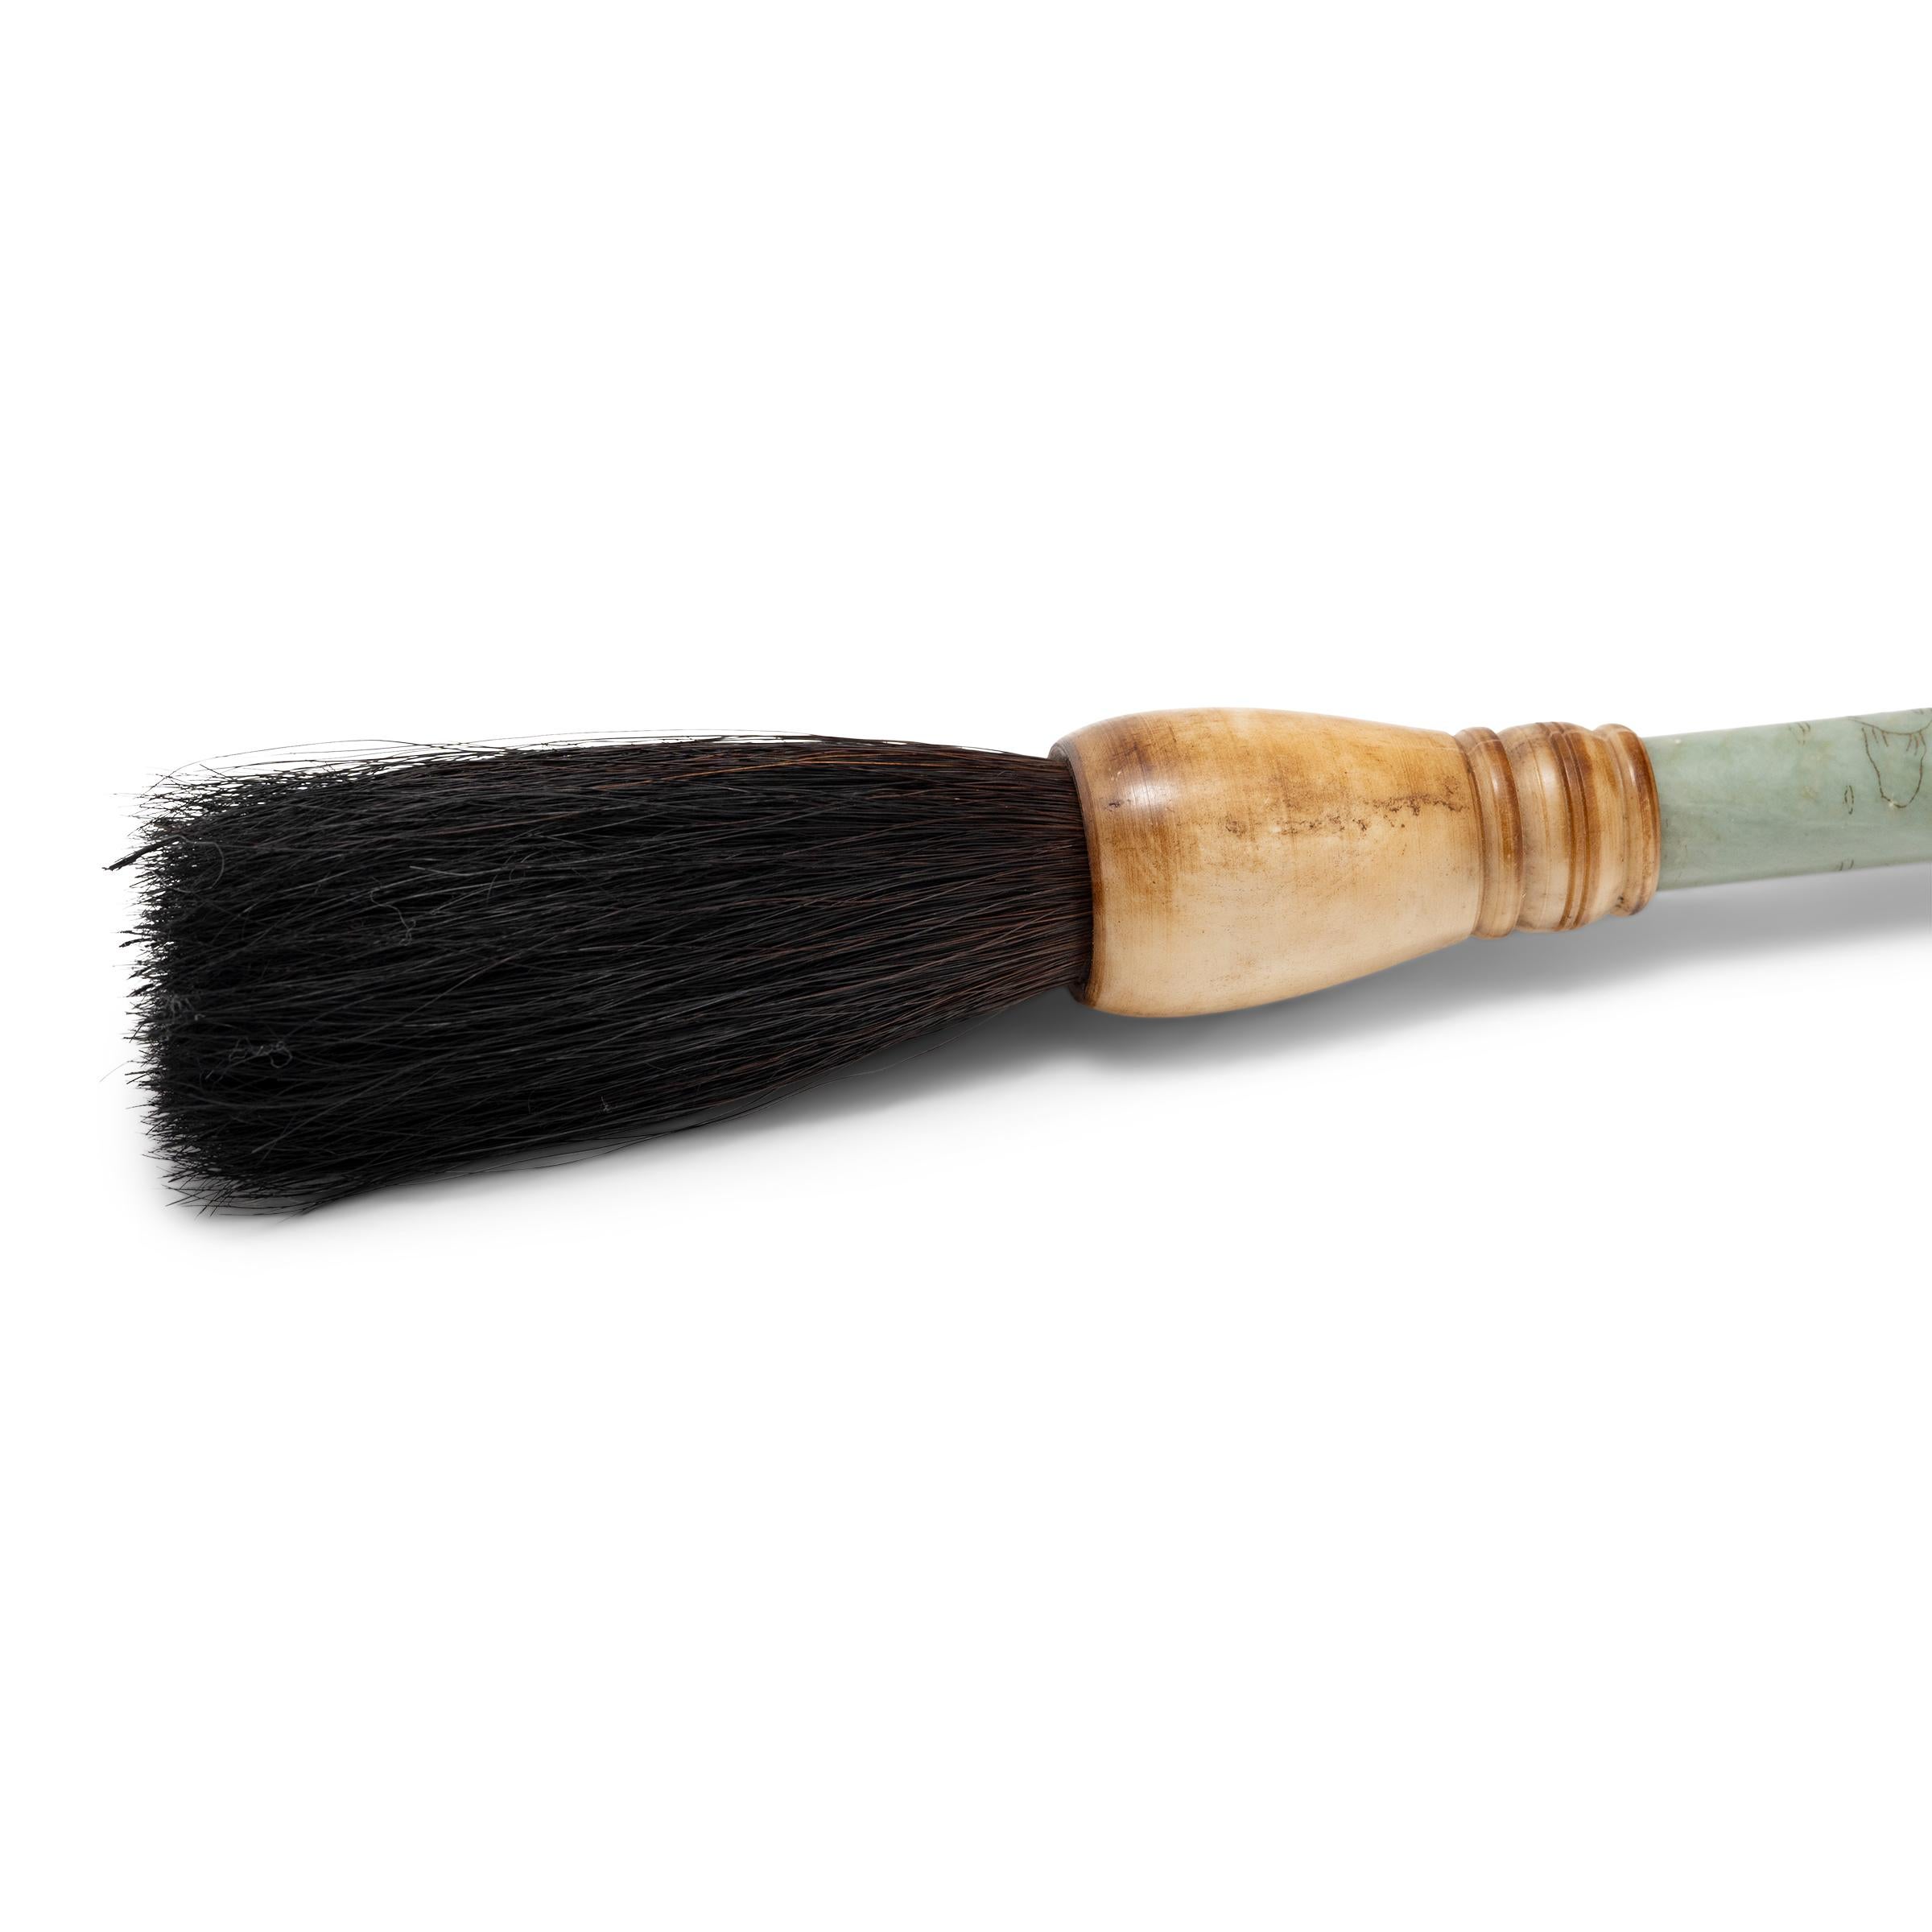 Along with paper, ink, and inkstone, the brush is one of the Four Treasures of the scholar’s studio. Arguably the most important tool, the brush served as a direct link to the artist’s creative spirit. The polished jade stone handle of this large